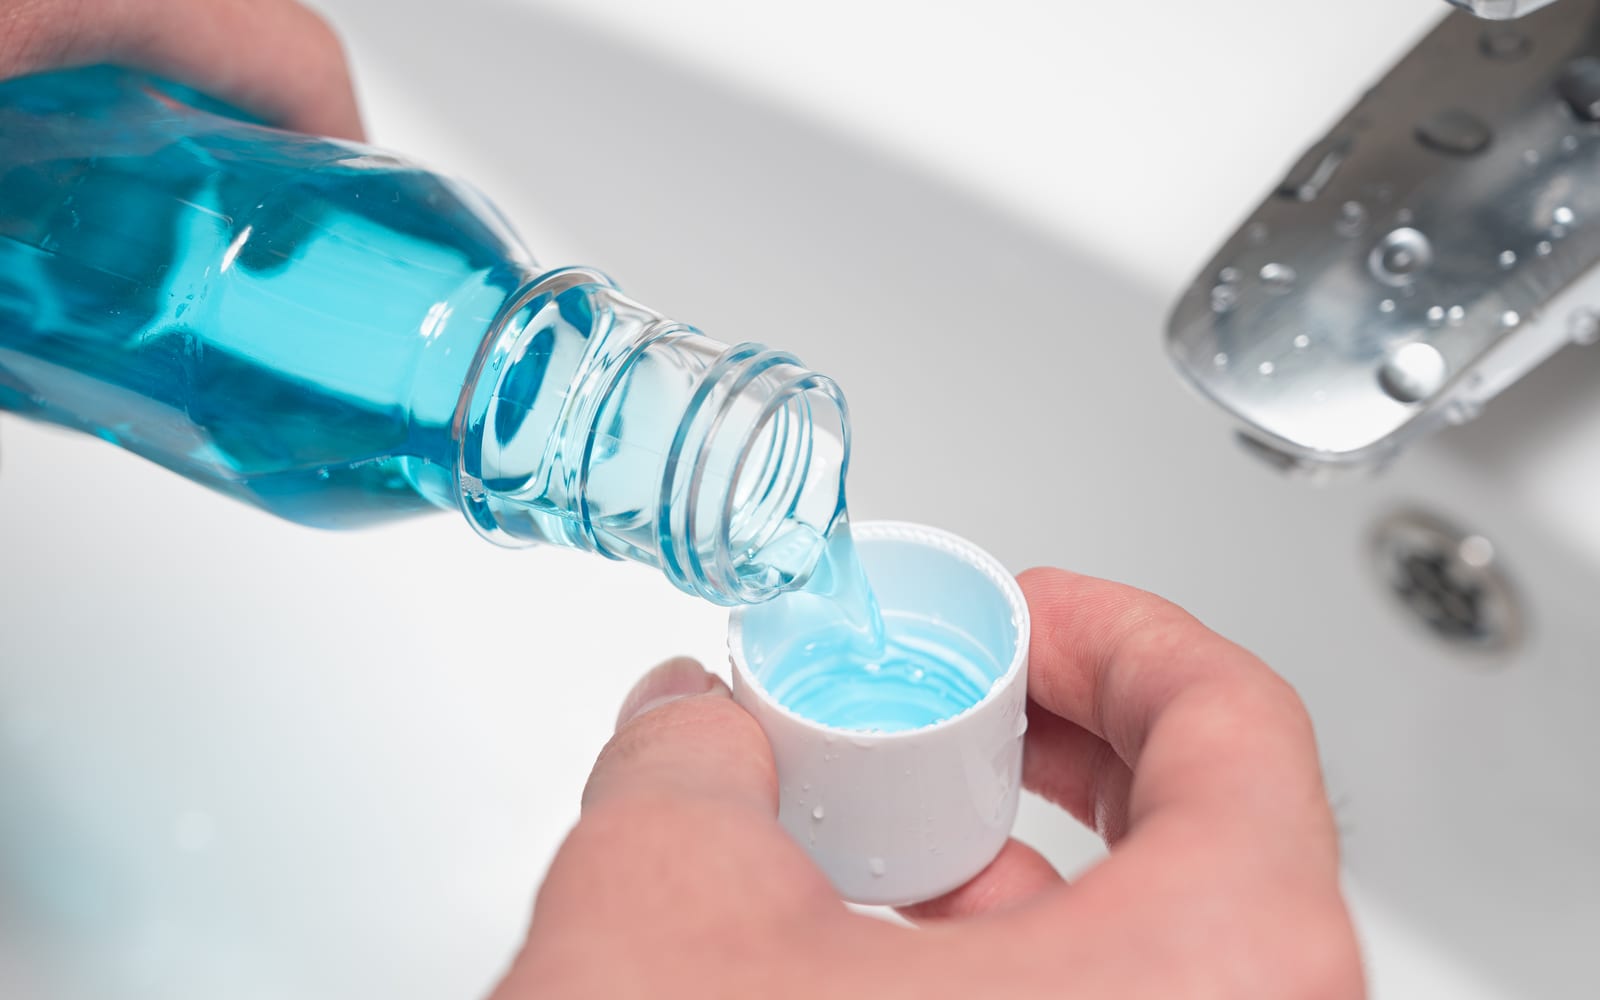 Fluoride containing mouthwash being used